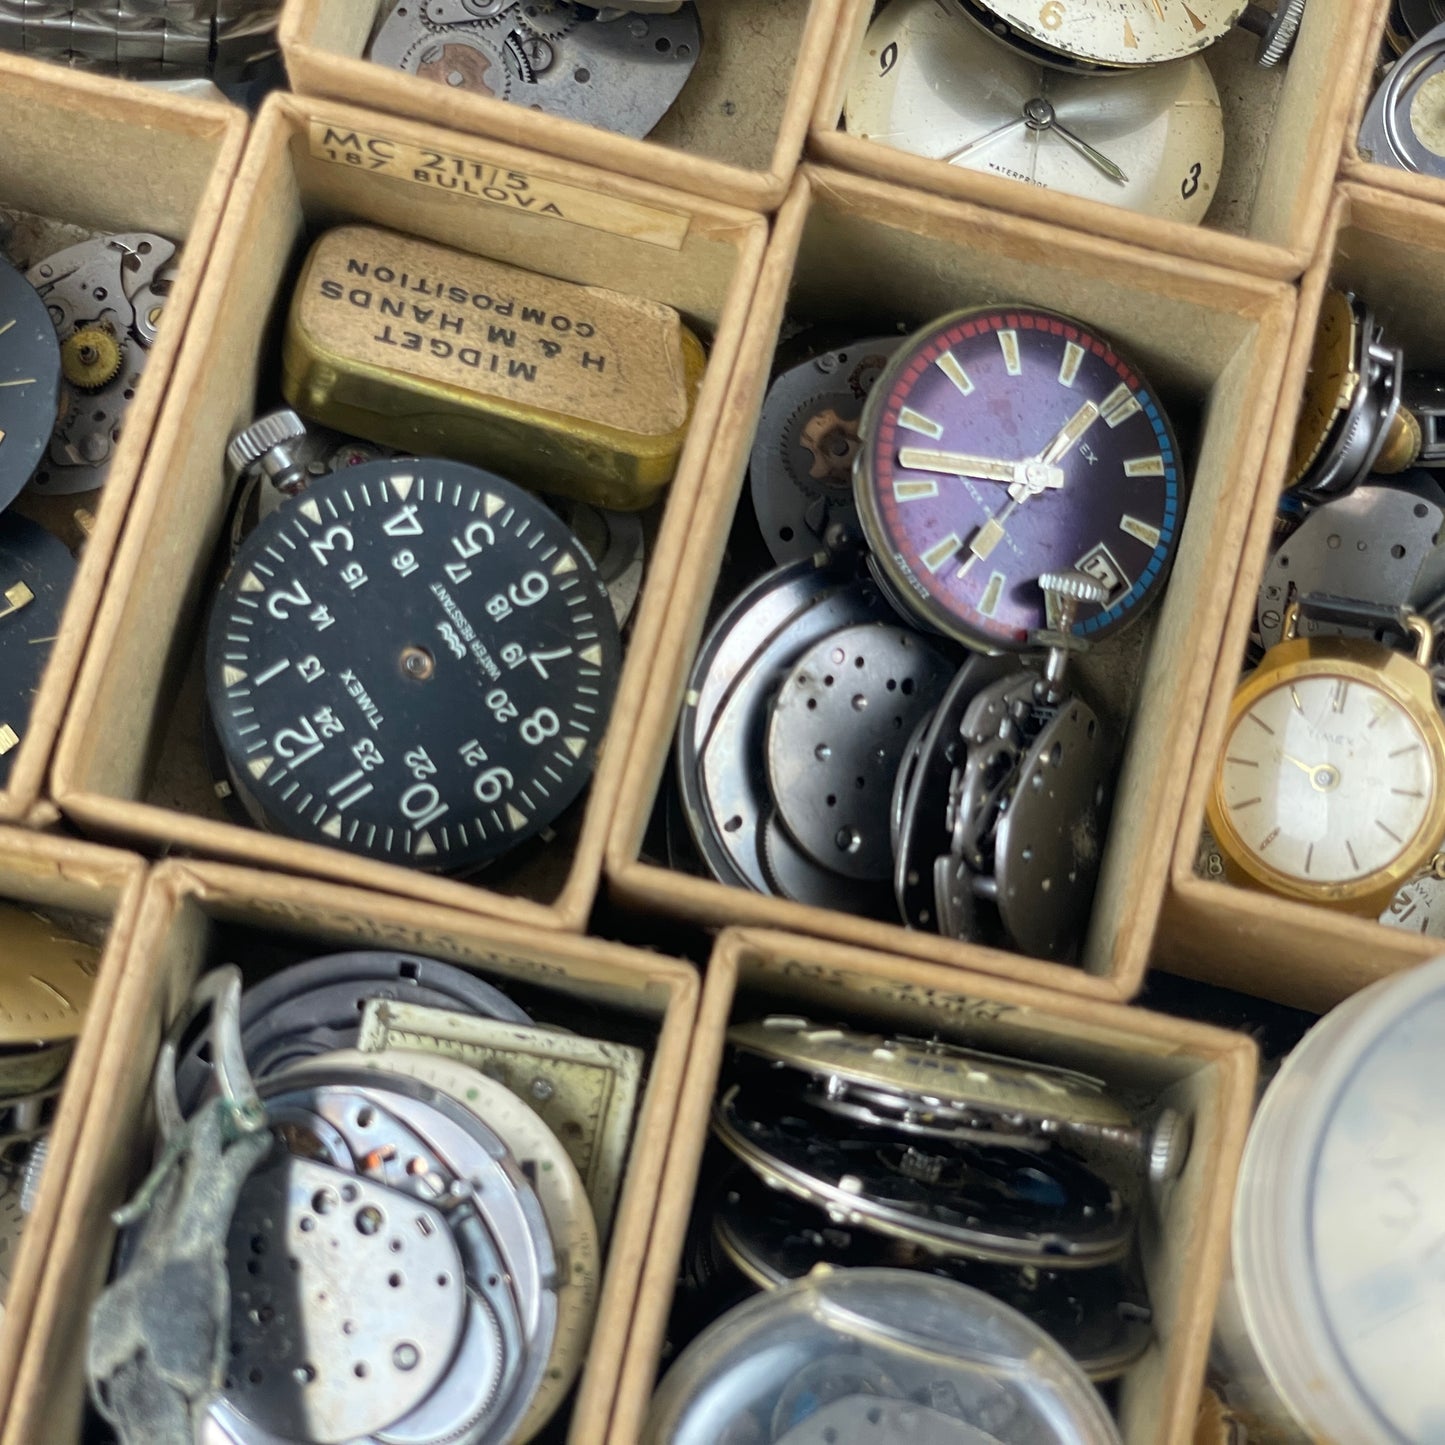 May Lot 33- Massive Vintage Timex Drawer